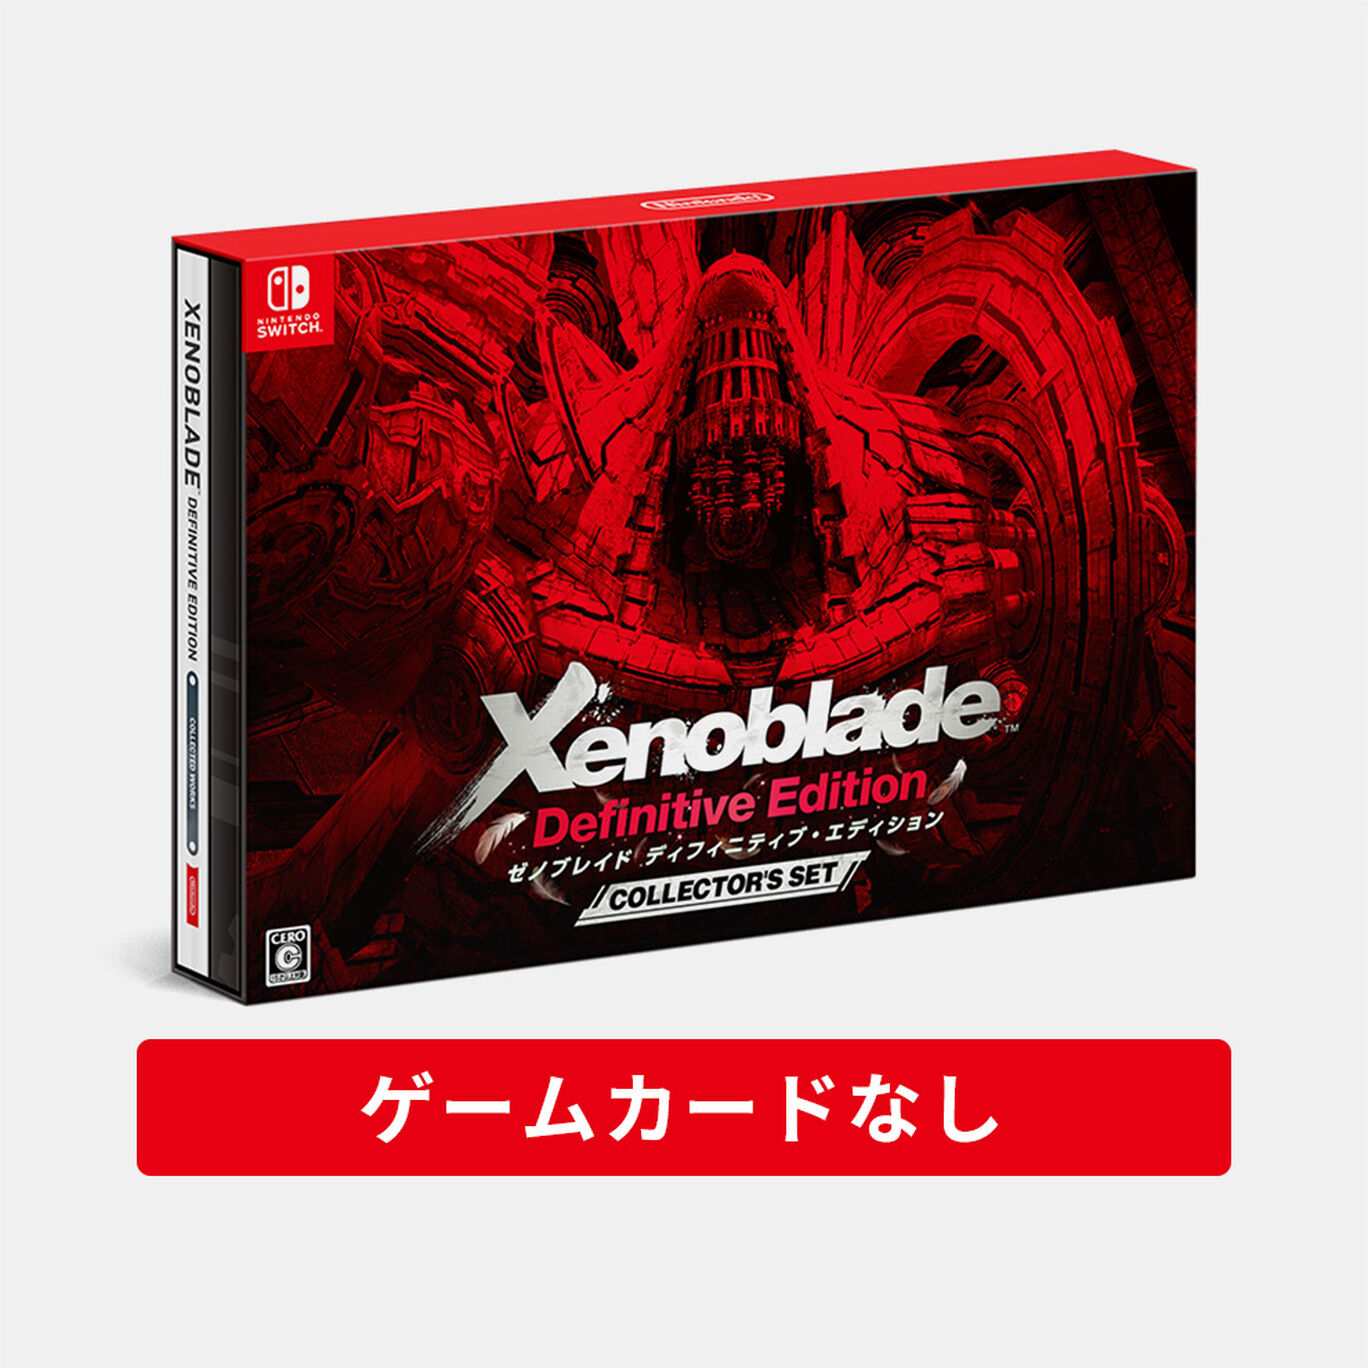 Xenoblade Definitive Edition Collector's Set（ゲームカードなし）※特典のみ